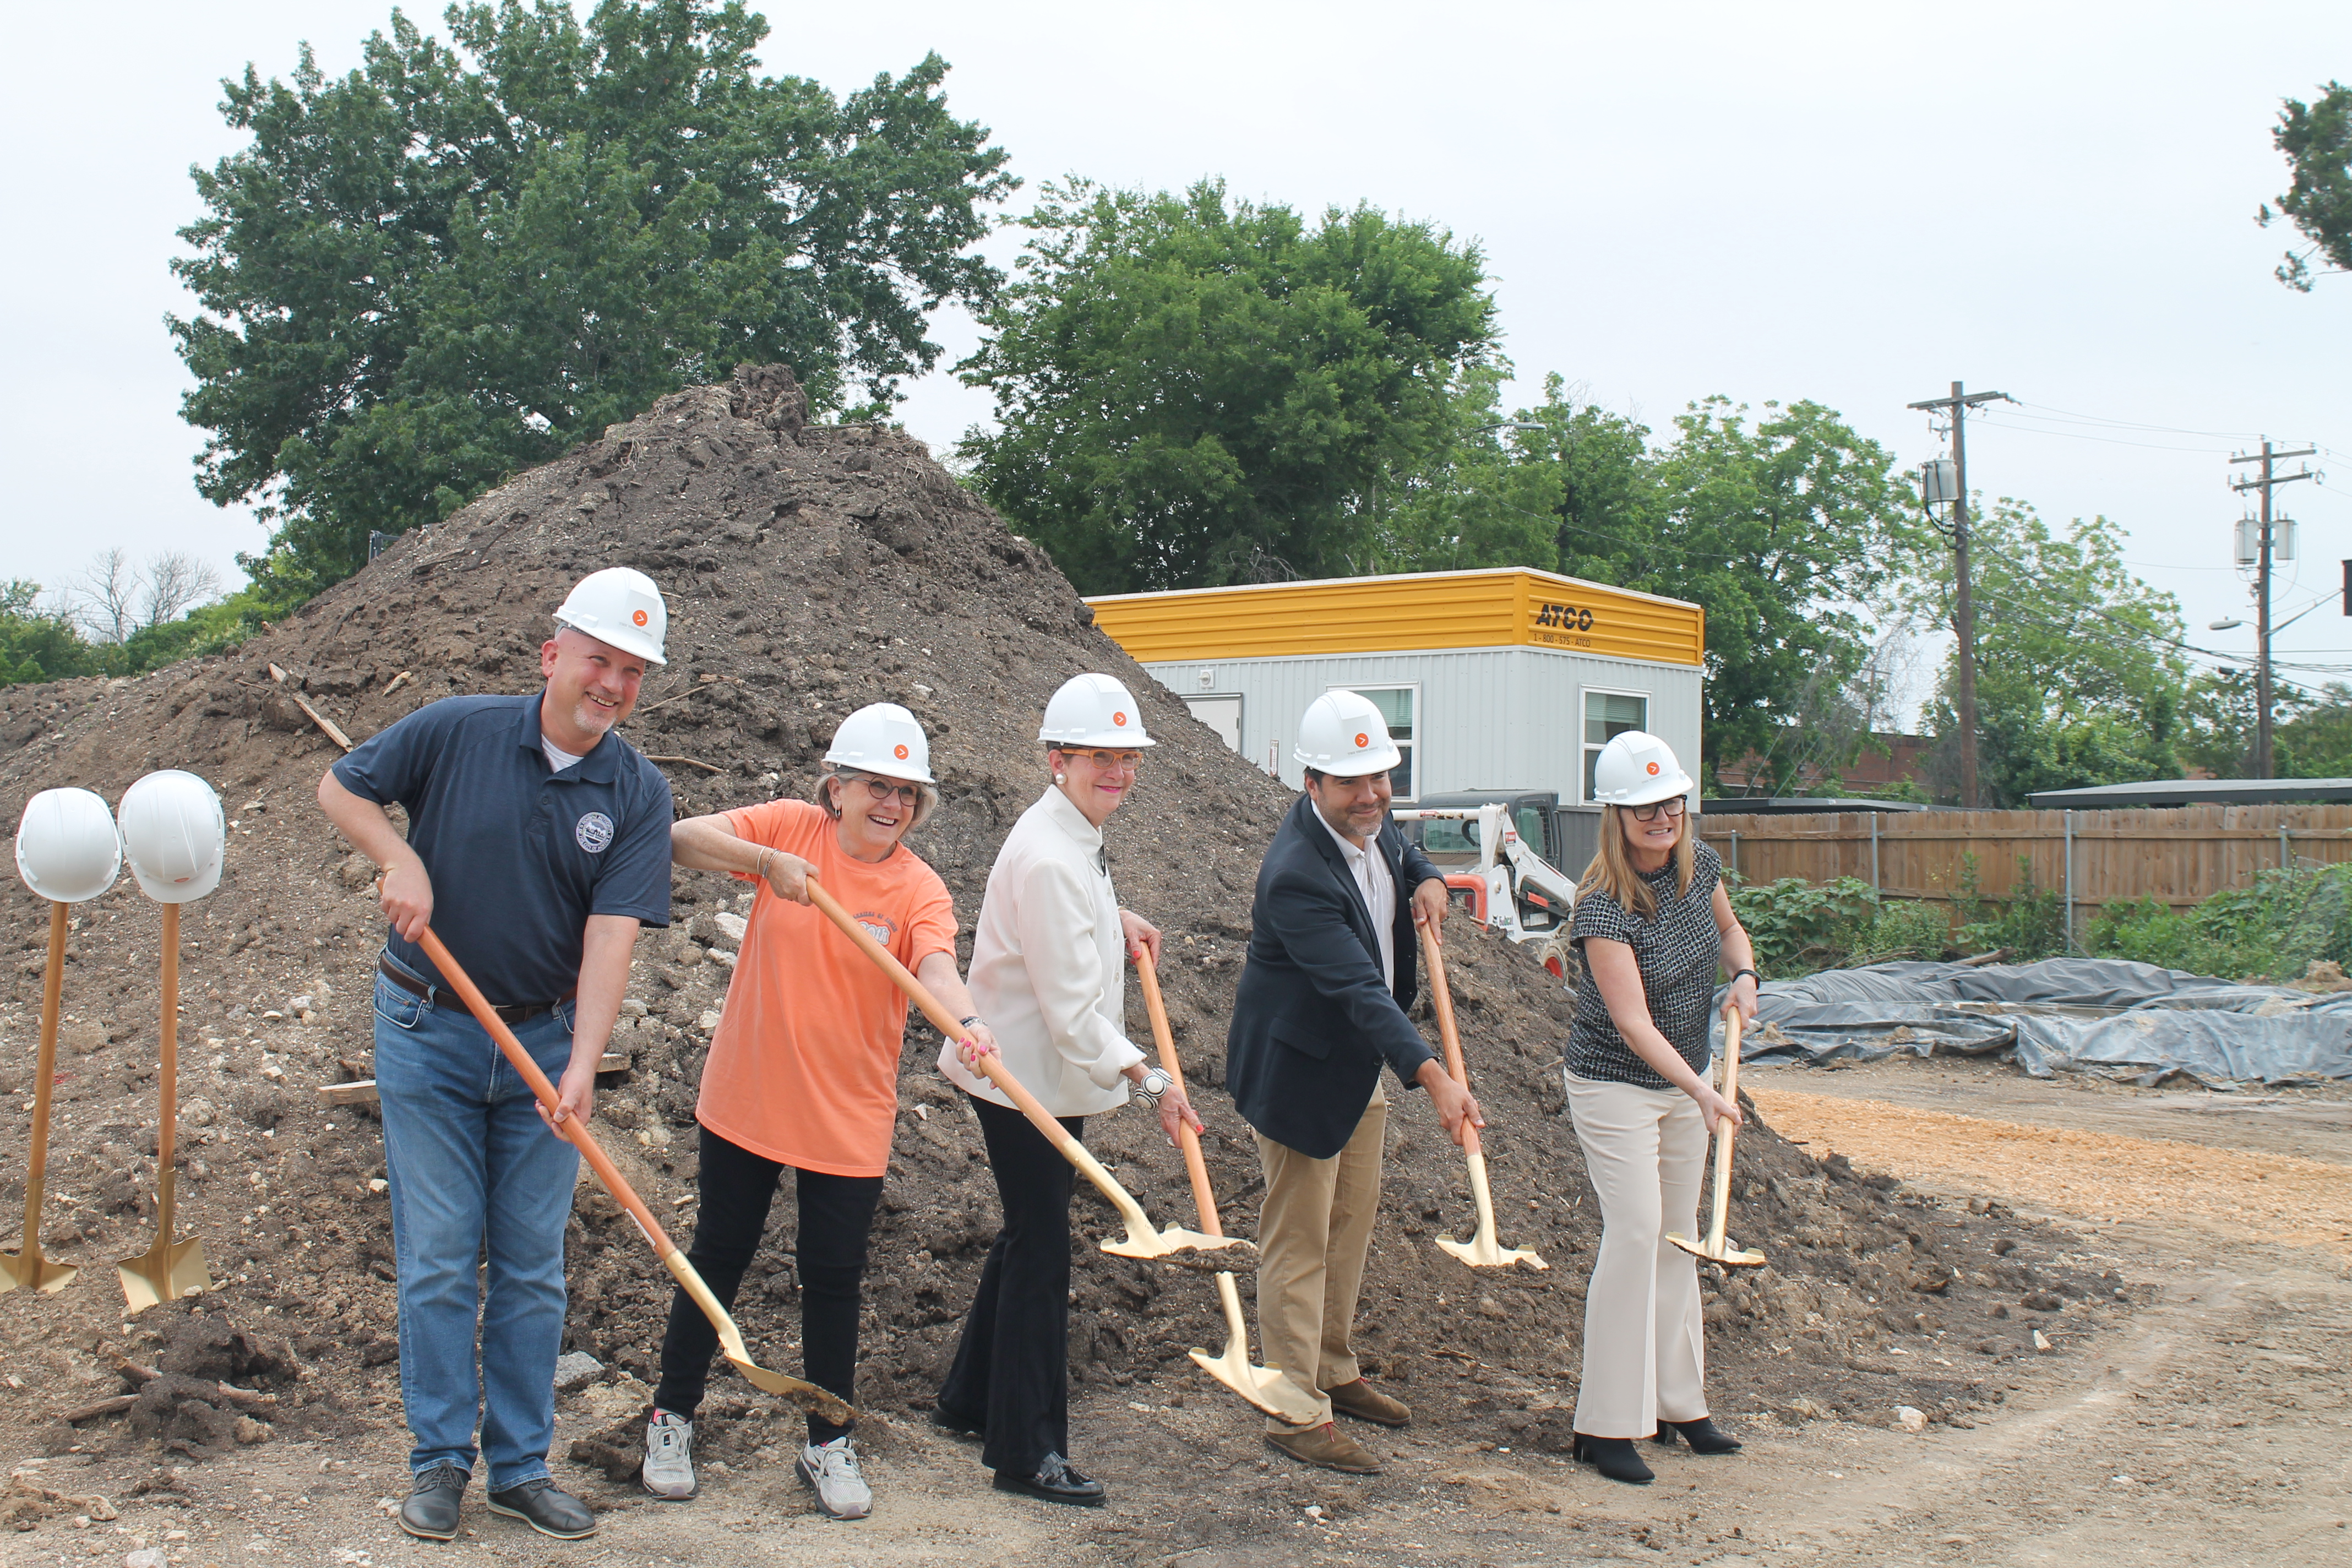 Image shows five people holding dirt-filled shovels at the groundbreaking ceremony for the new community called Cairn Point Cameron groundbreaking ceremony.